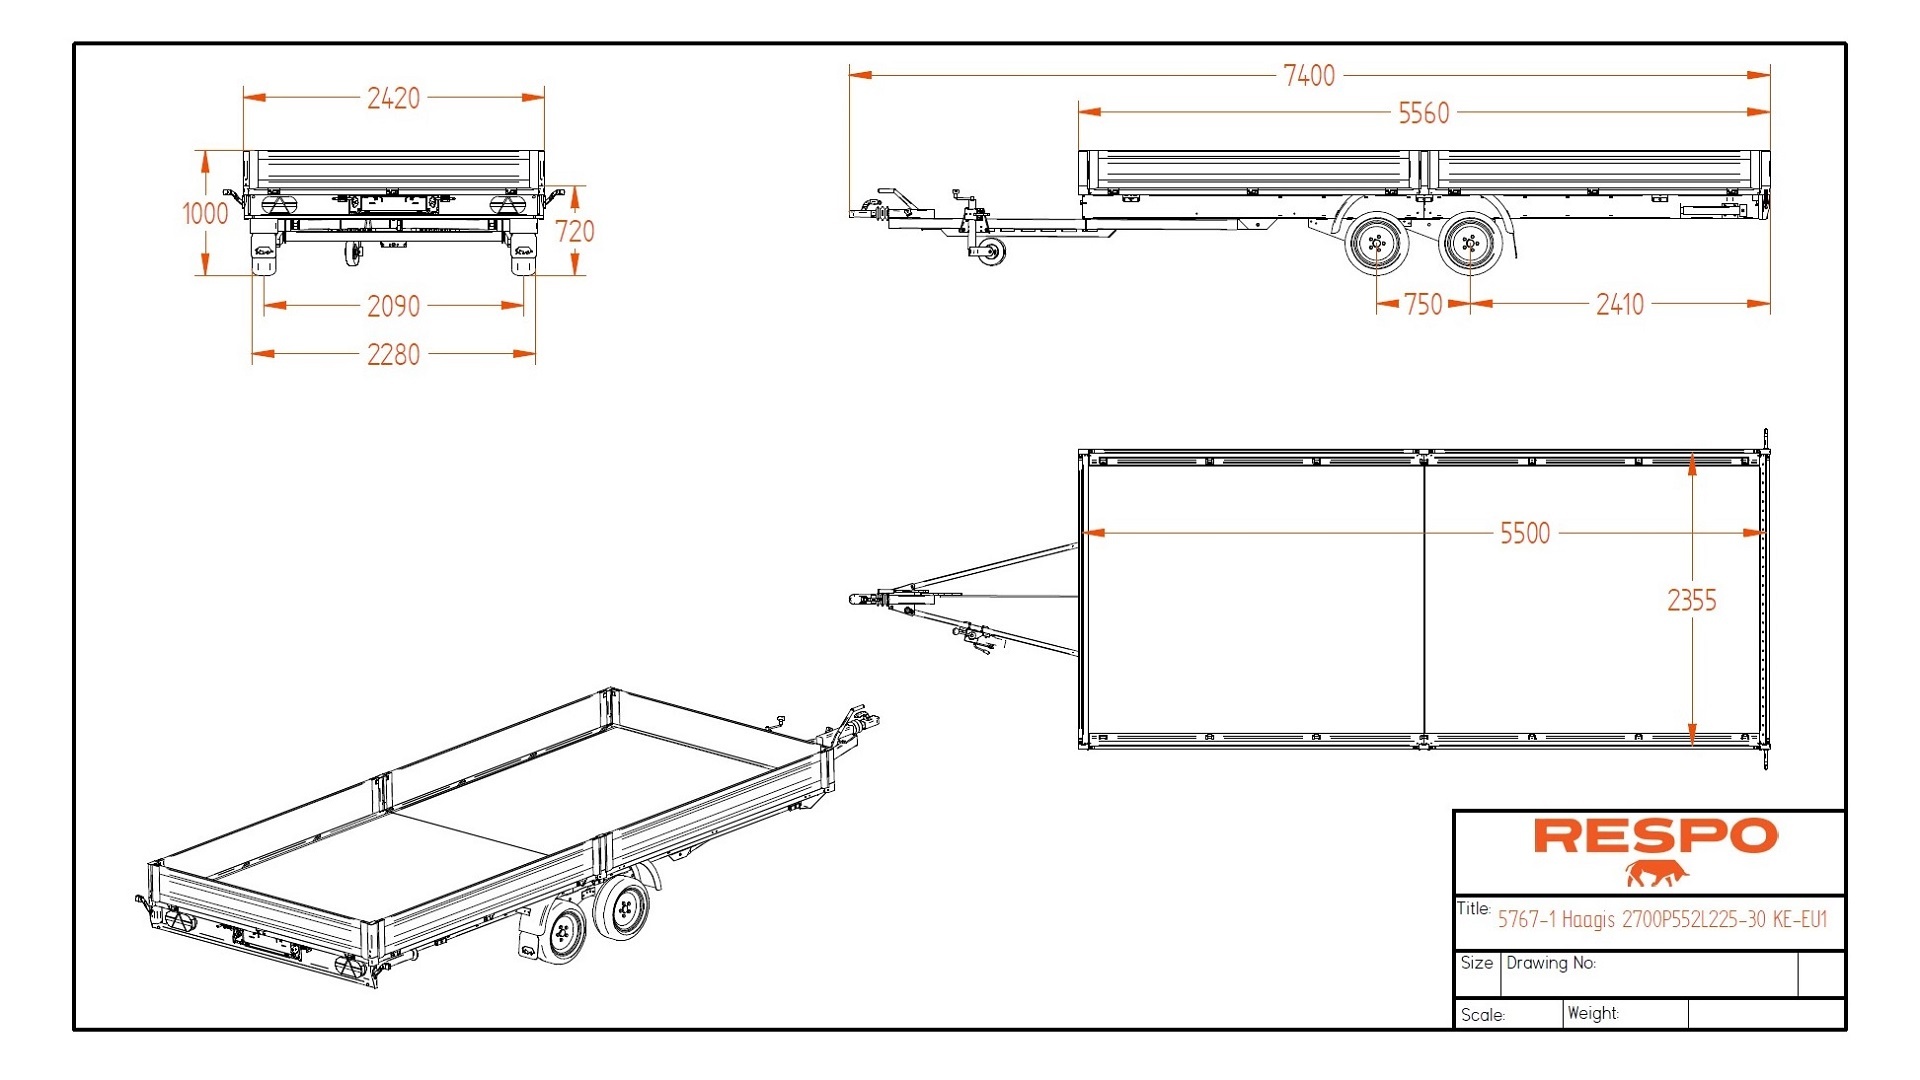 2700P552T225 Flatbed (with accessories)